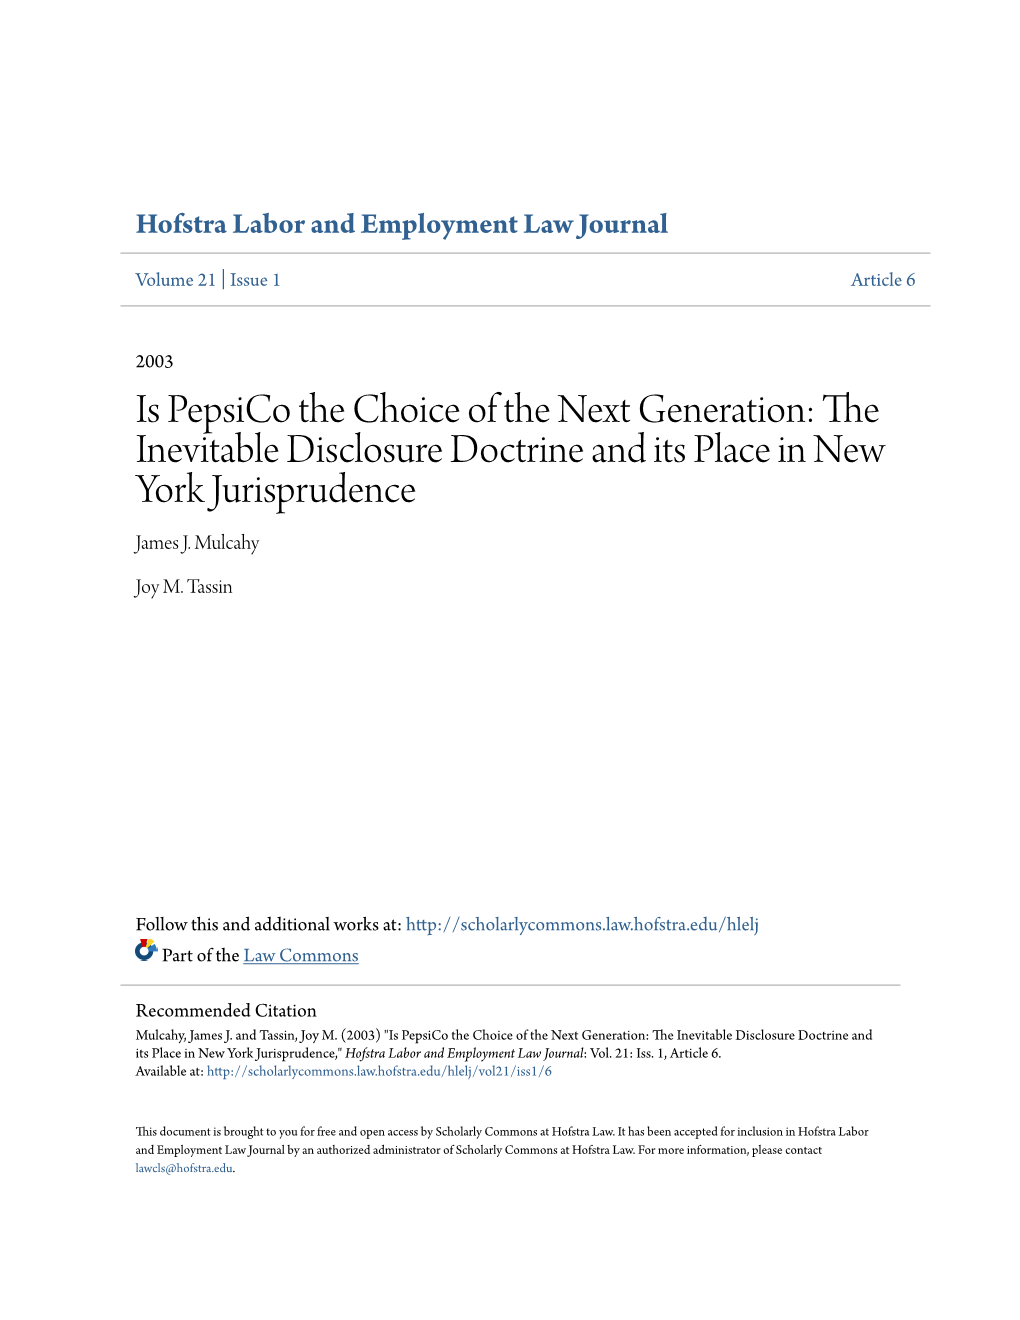 Pepsico the Choice of the Next Generation: the Inevitable Disclosure Doctrine and Its Place in New York Jurisprudence James J